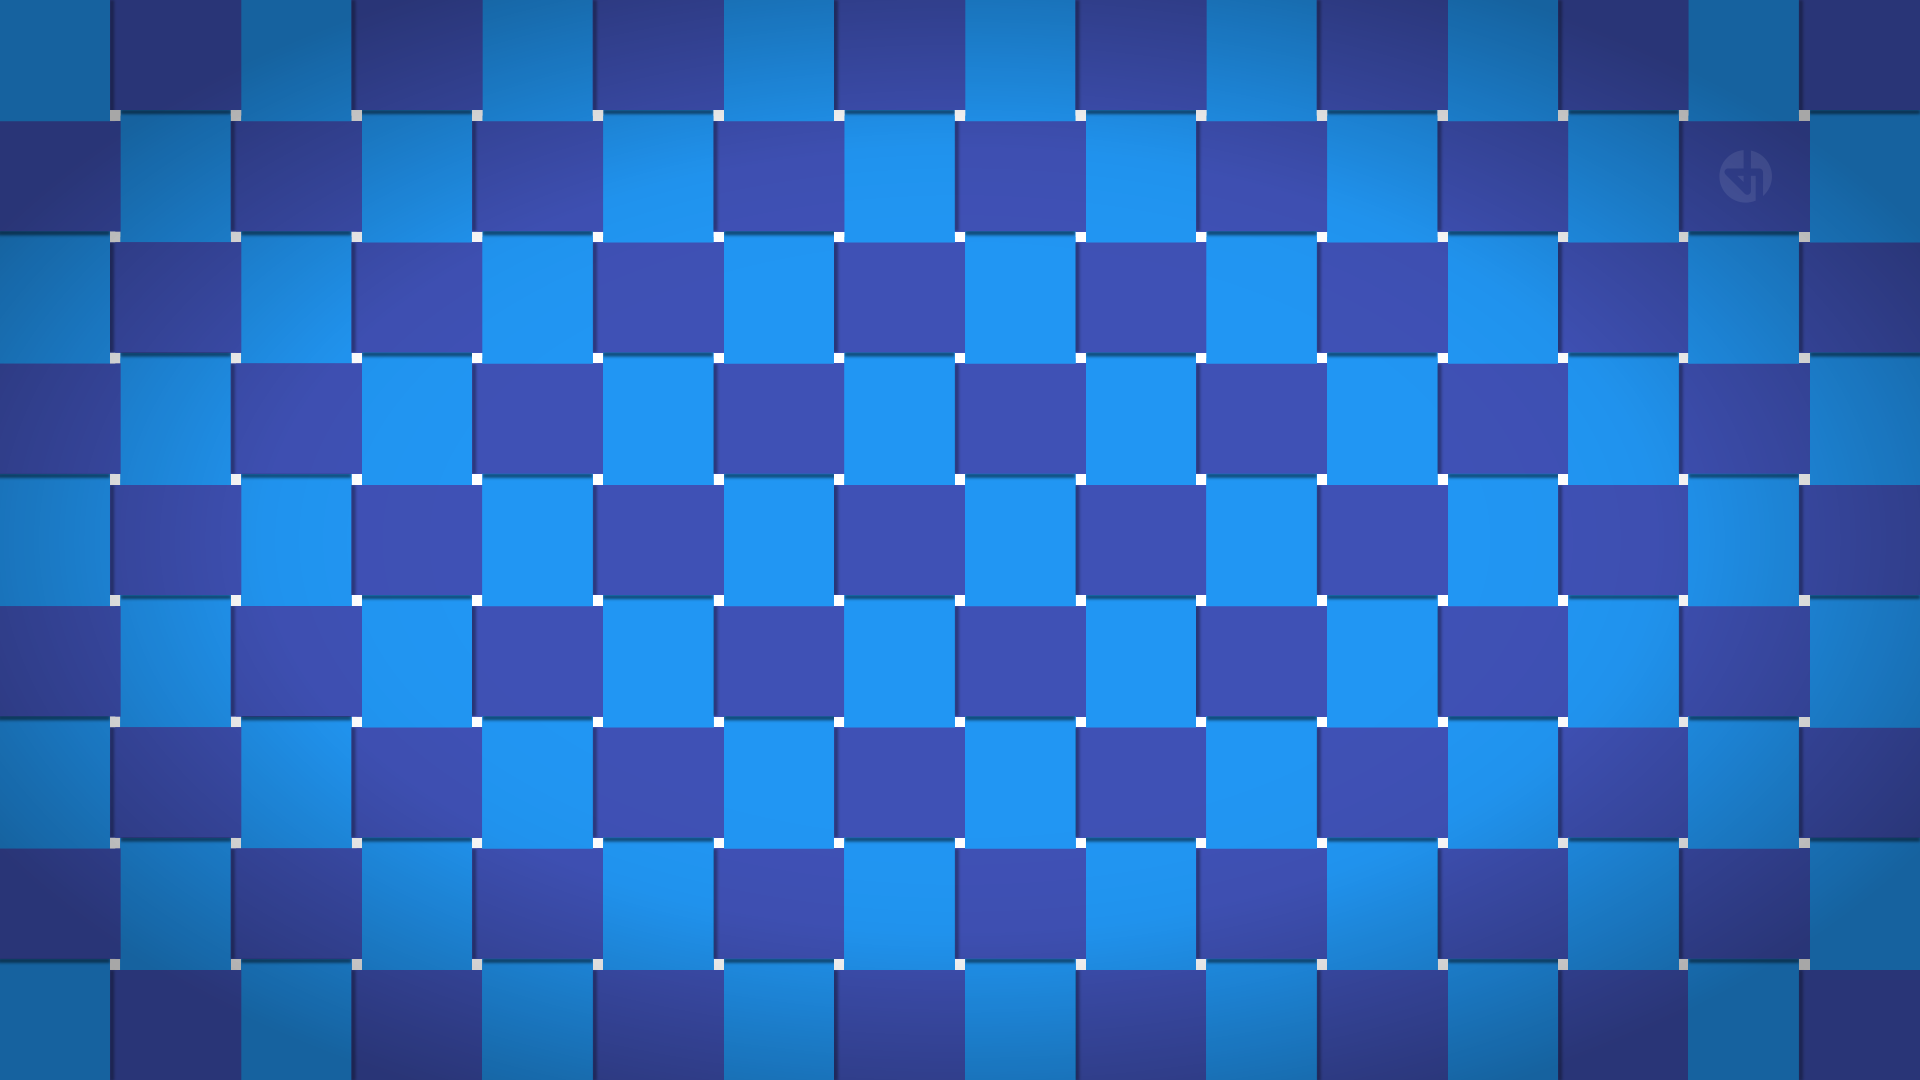 Simulating a complex layered structure in Inkscape with a checkerboard mat.